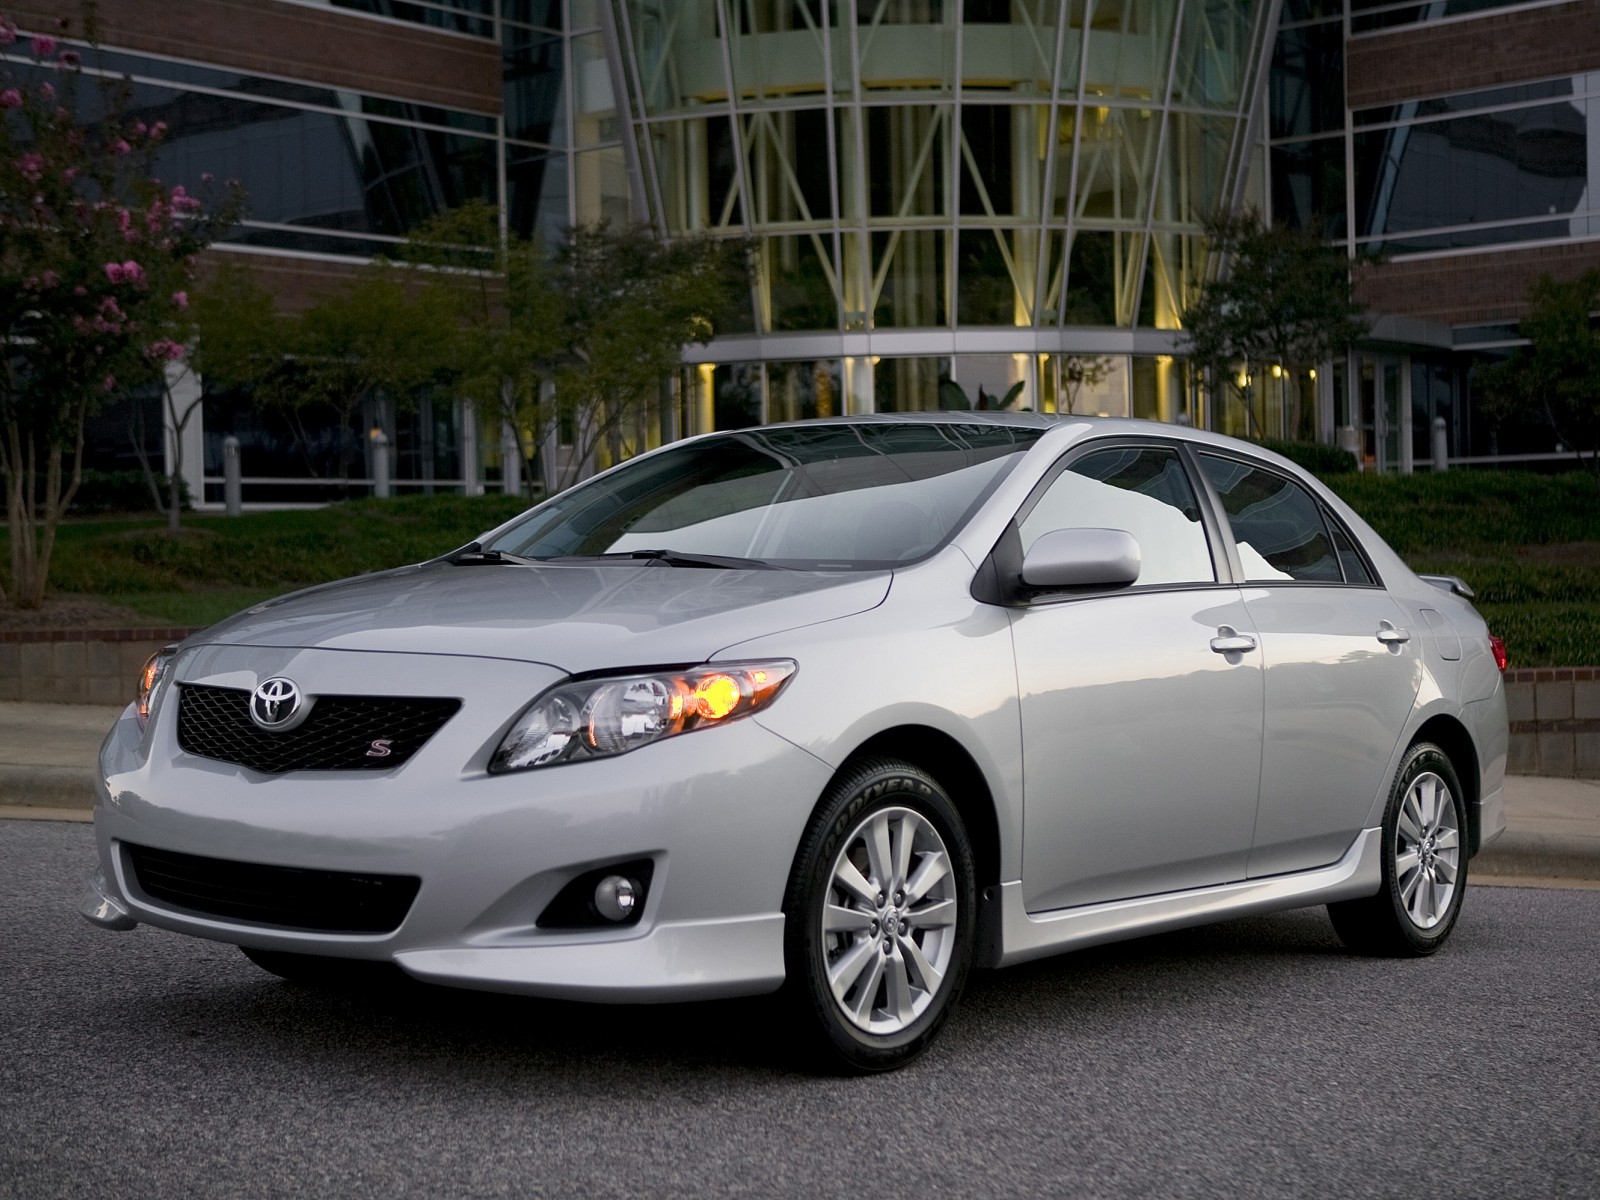 2009 toyota corolla s specifications #5